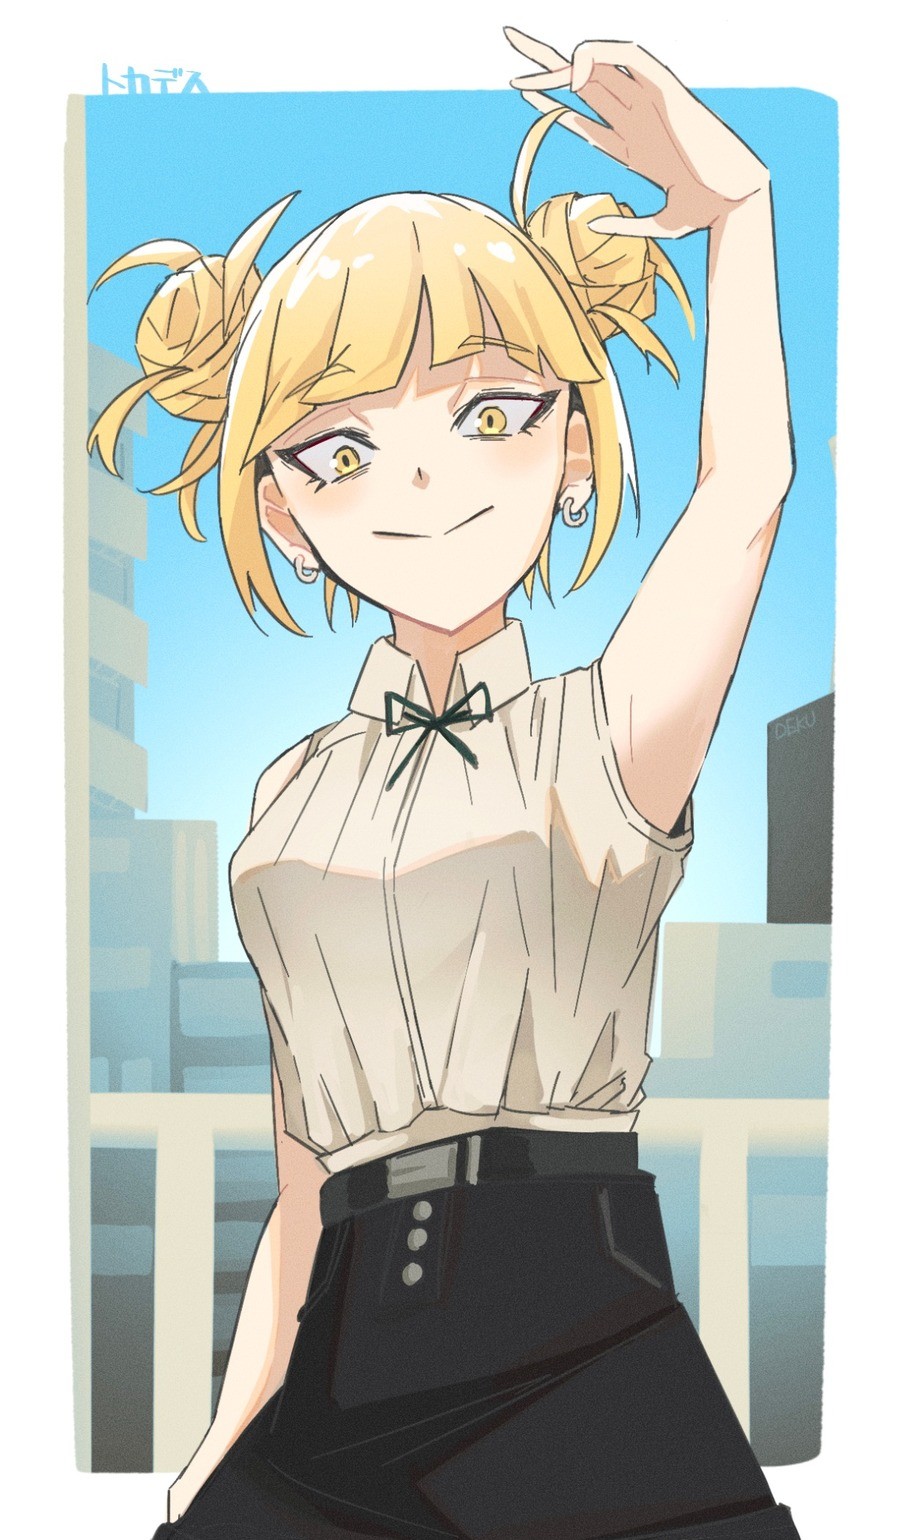 Daily Toga - 760: Skirt Toga. join list: DailyToga (476 subs)Mention History source: .